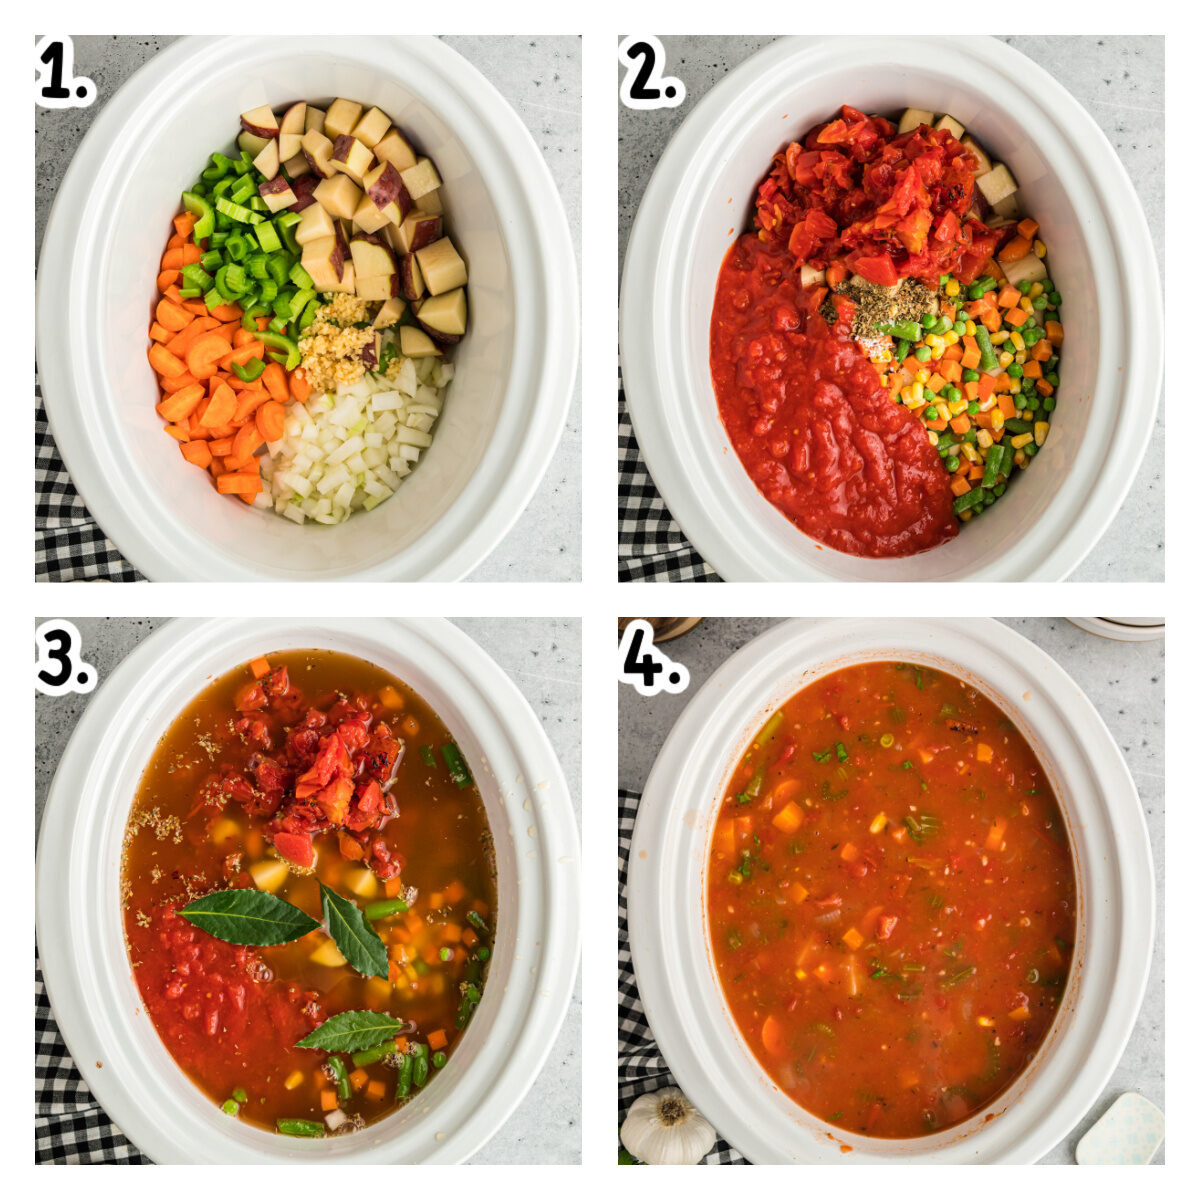 Four images showing how to make vegetable soup in a slow cooker.